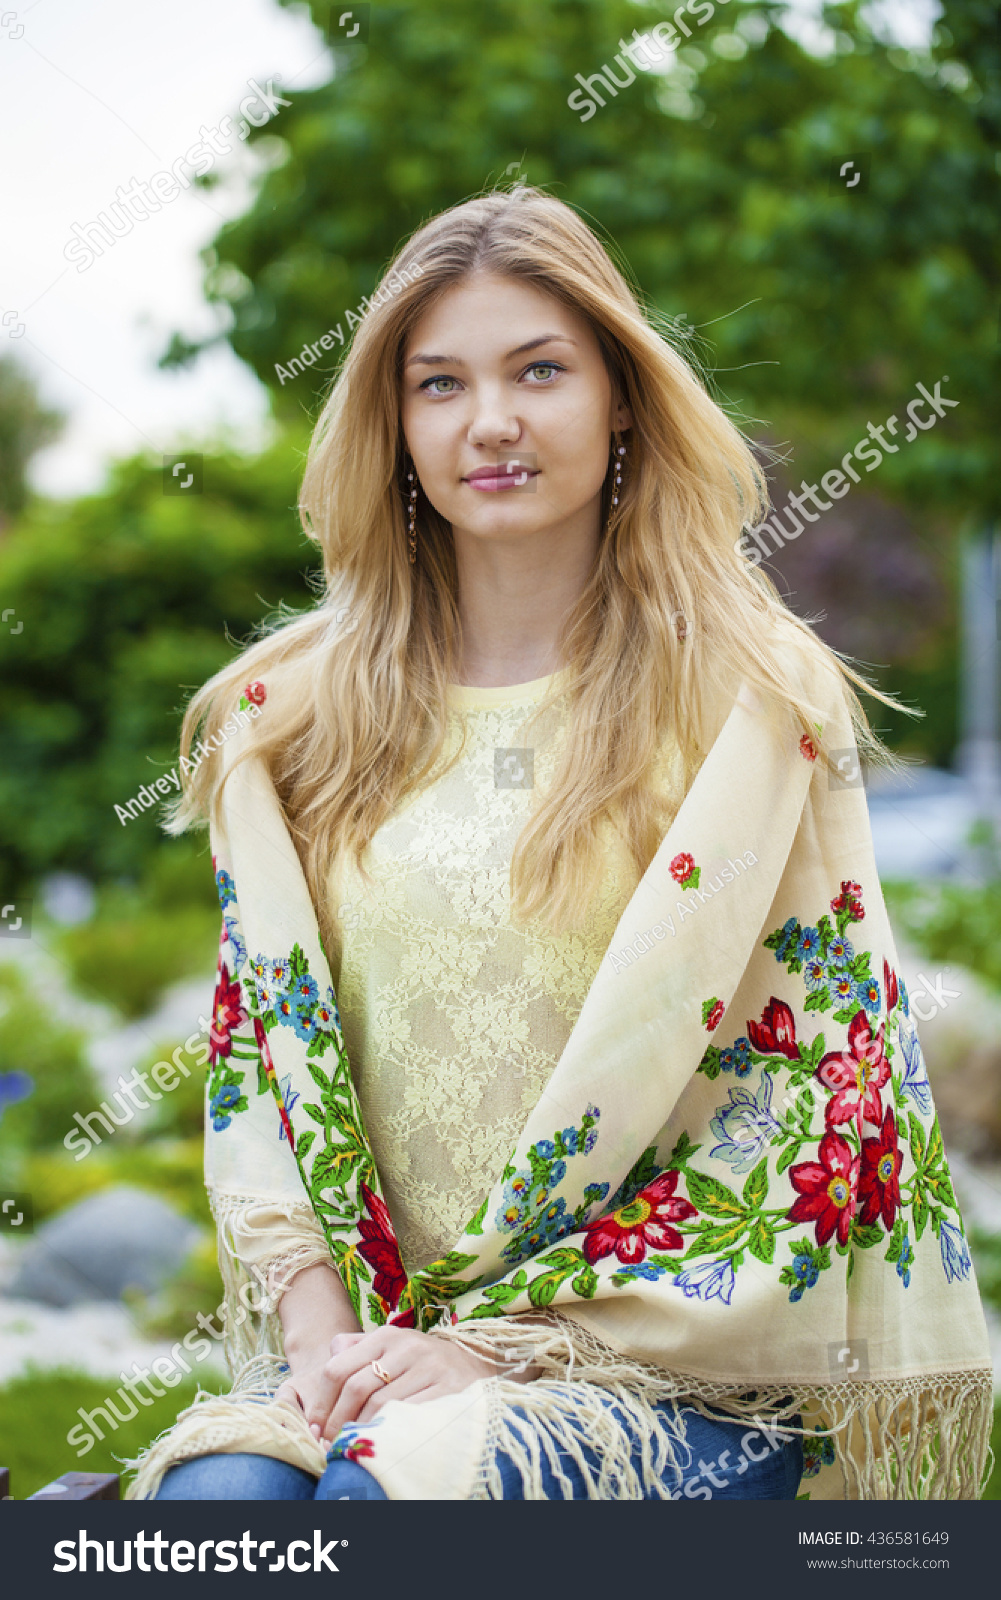 https://image.shutterstock.com/z/stock-photo-russian-beauty-woman-in-the-national-patterned-scarf-436581649.jpg